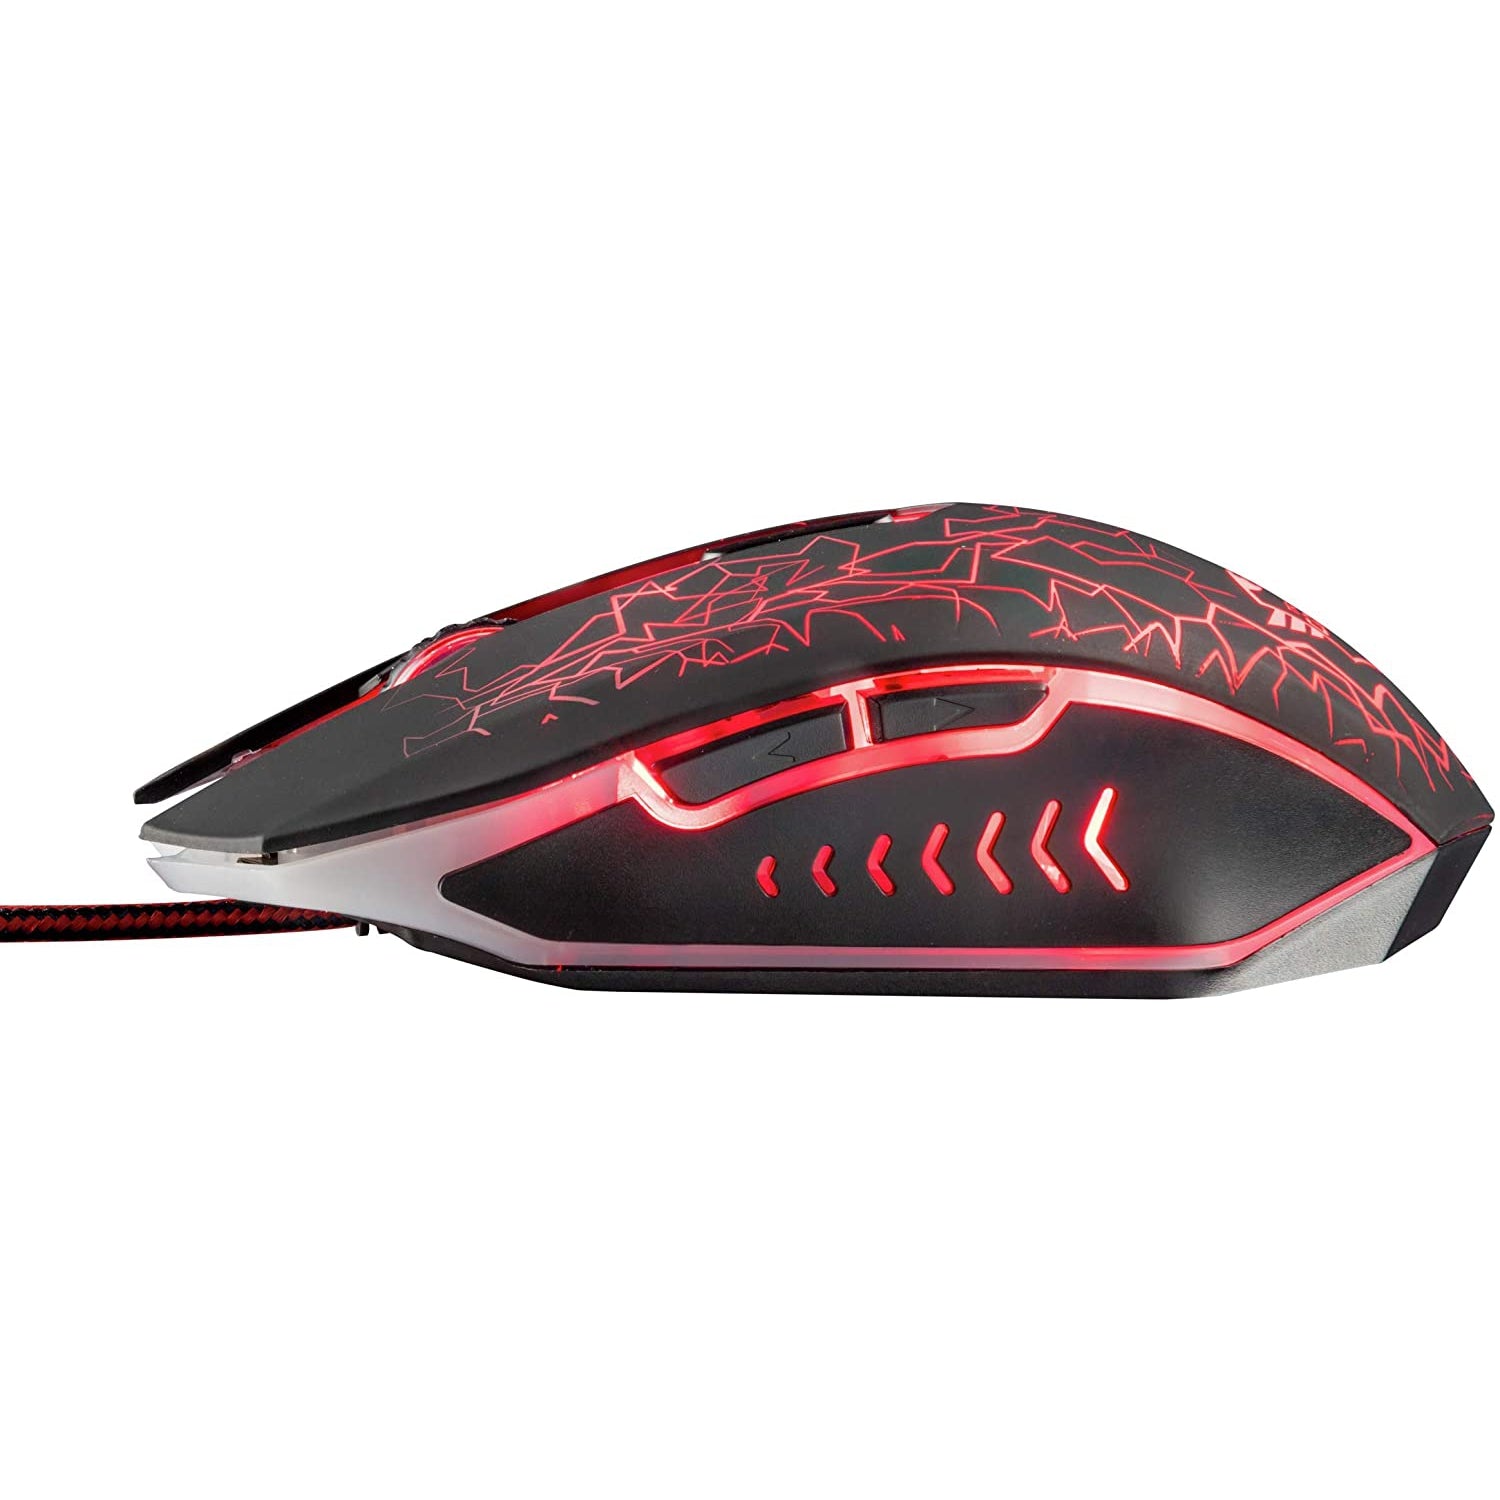 Trust GXT 105 Izza Wired Gaming Mouse, Black - Pristine